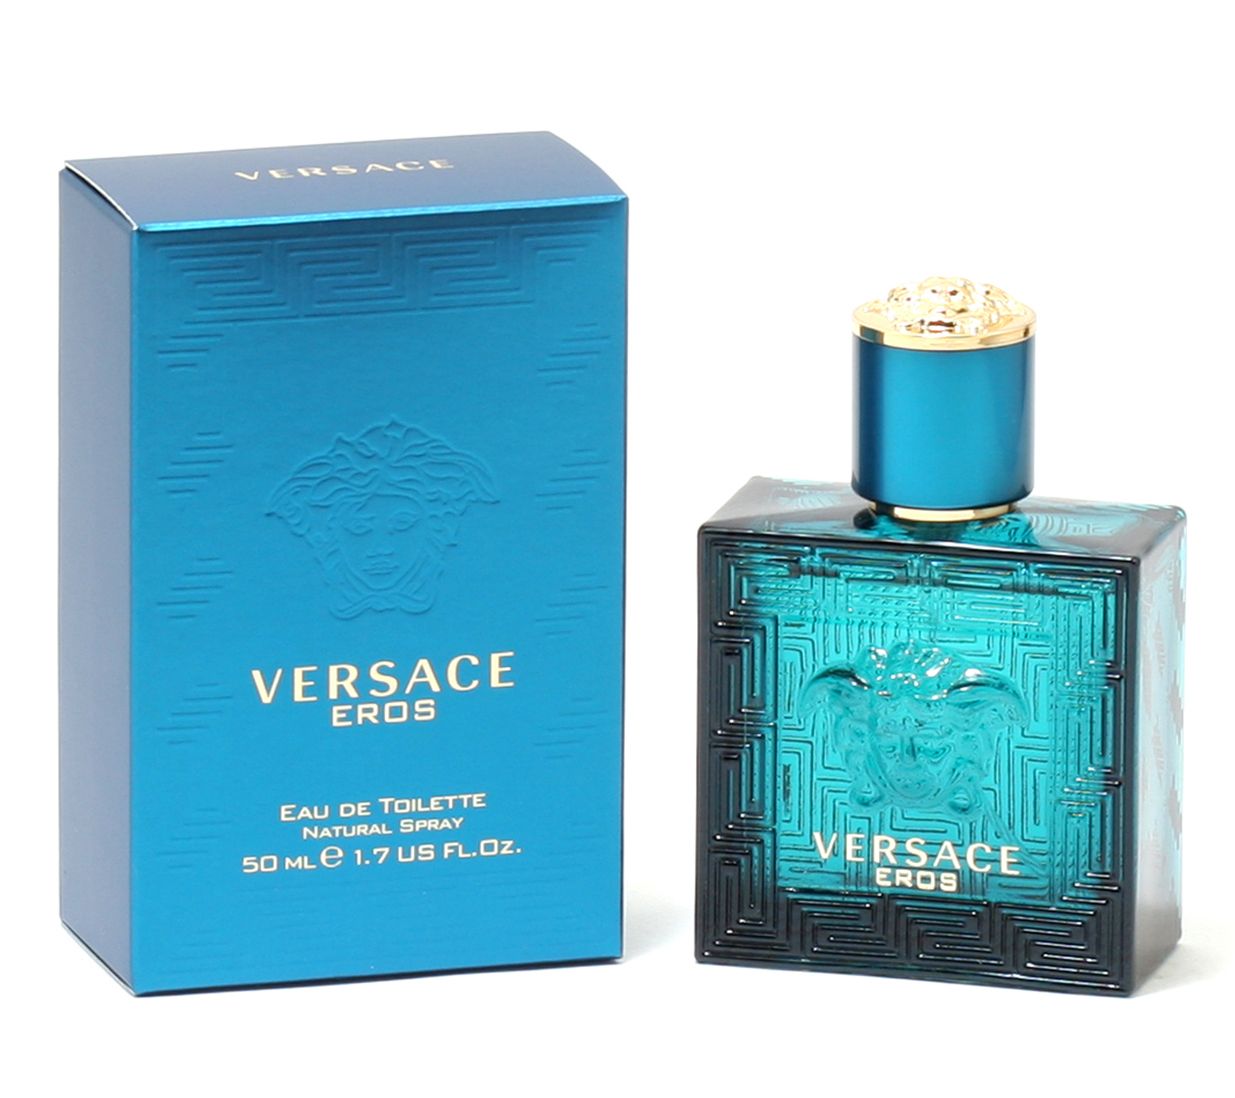 Versace EROS For Men - I Finally Got It! Here's What It Smells Like  [Review]